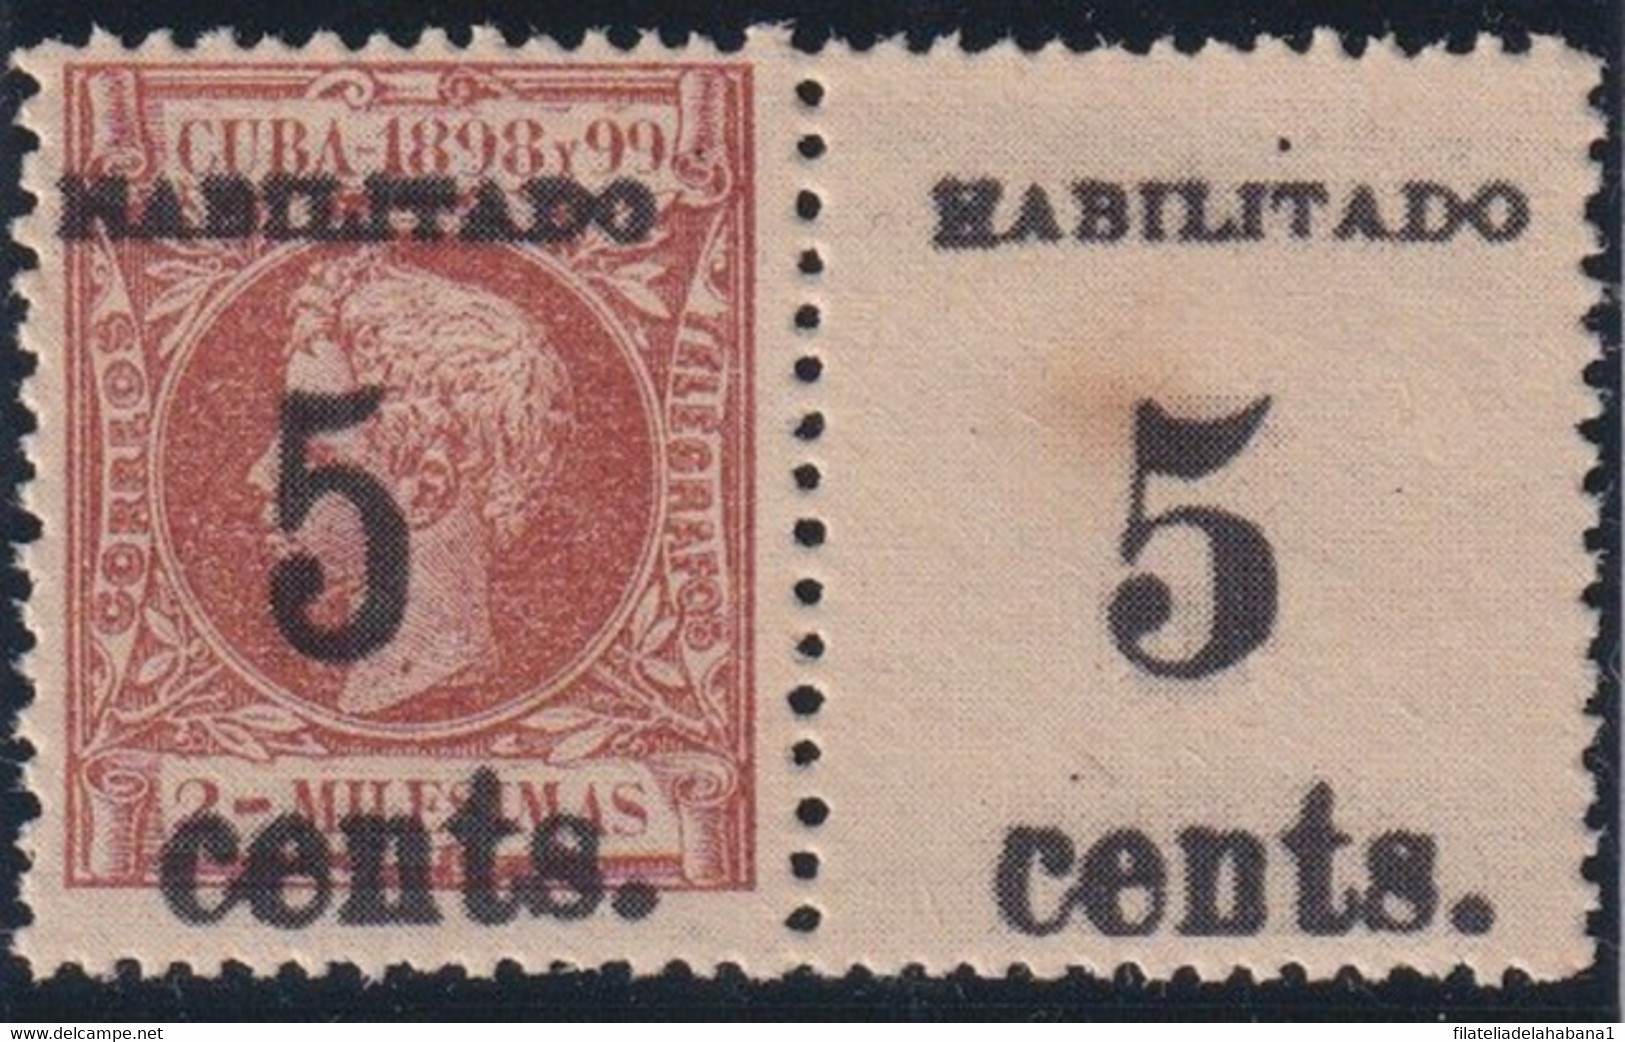 1899-608 CUBA 1899 US OCCUPATION. FORGERY PUERTO PRINCIPE. 2º ISSUE. 5c S. 5 Mls. PAIR NORMAL + SMALL NUMBER. - Nuevos